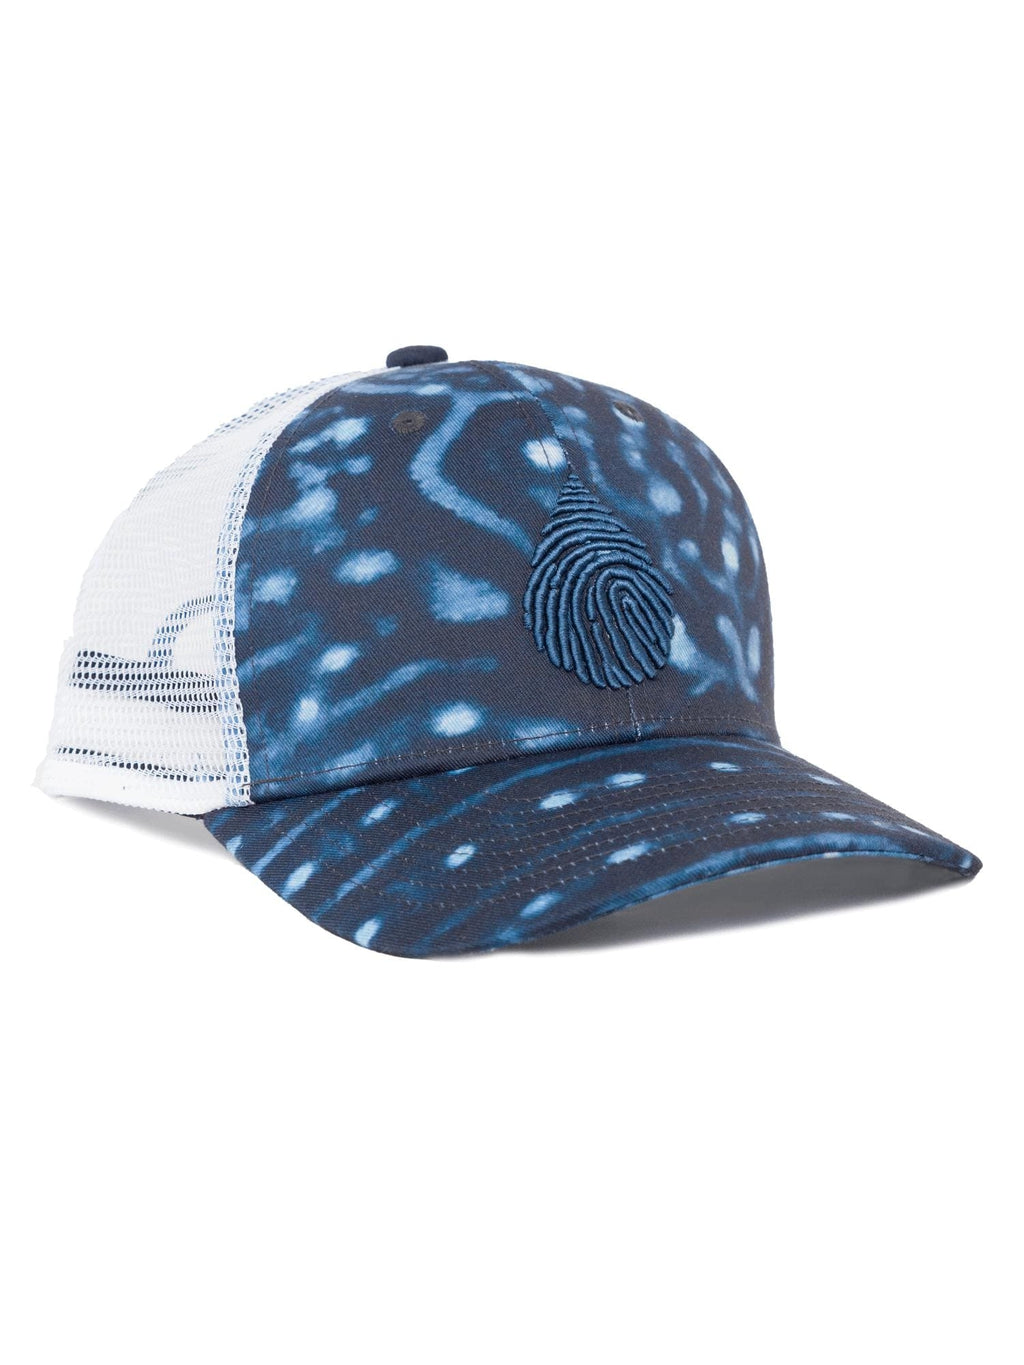 Recycled Whale Shark Printed Trucker Hat